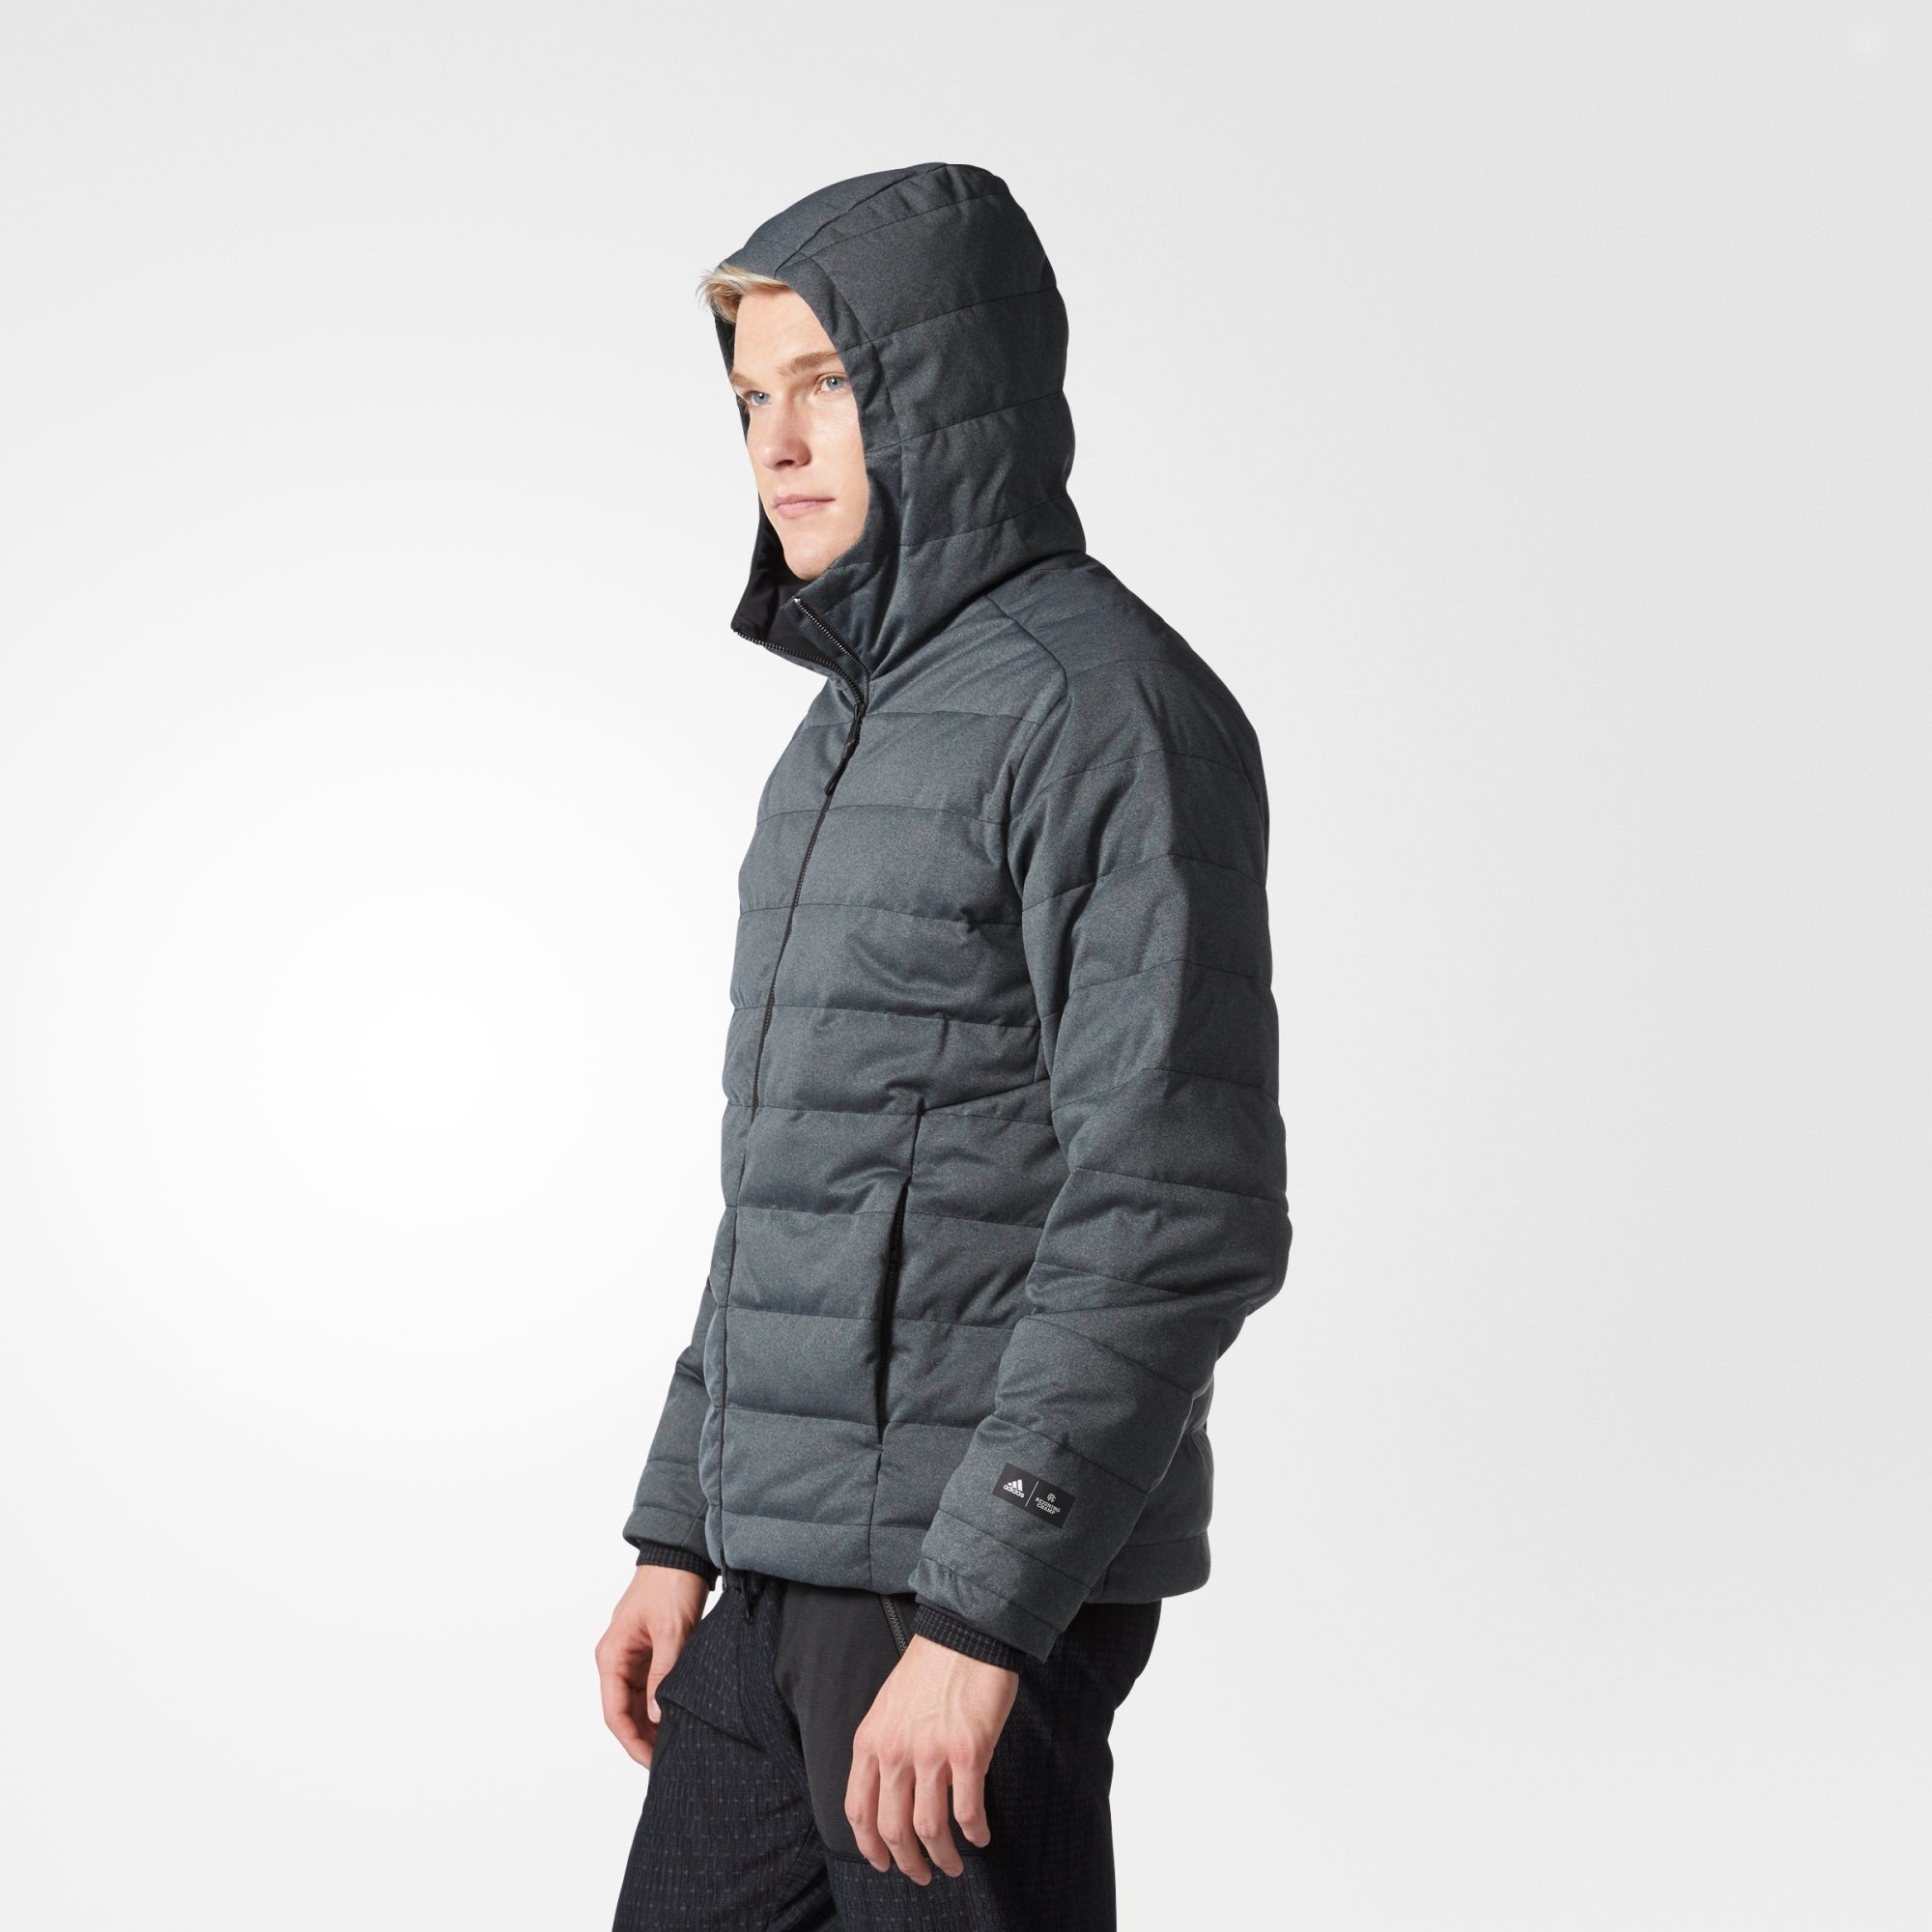 adidas reigning champ down jacket